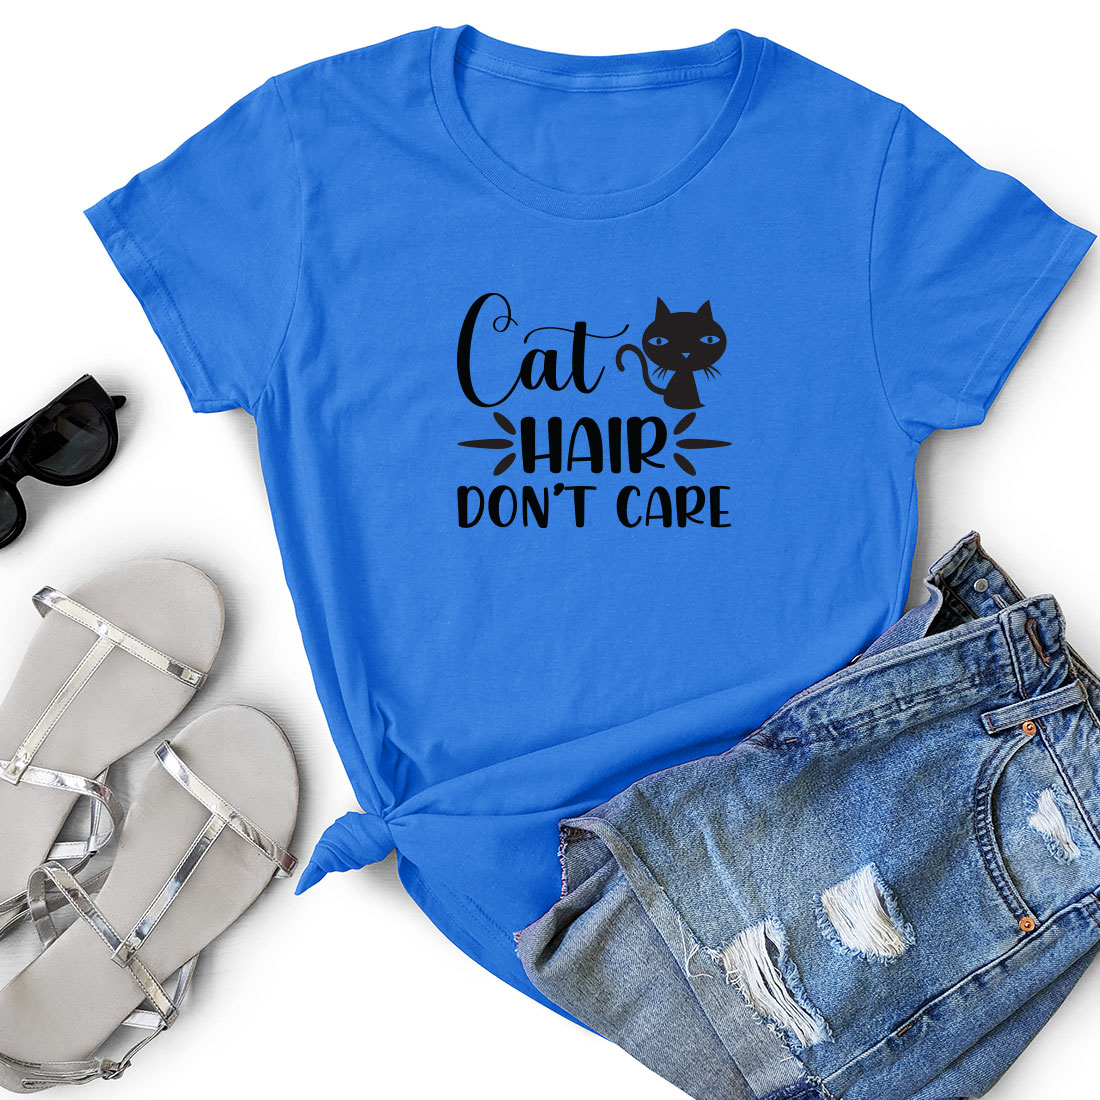 T - shirt that says cat hair don't care next to a pair.